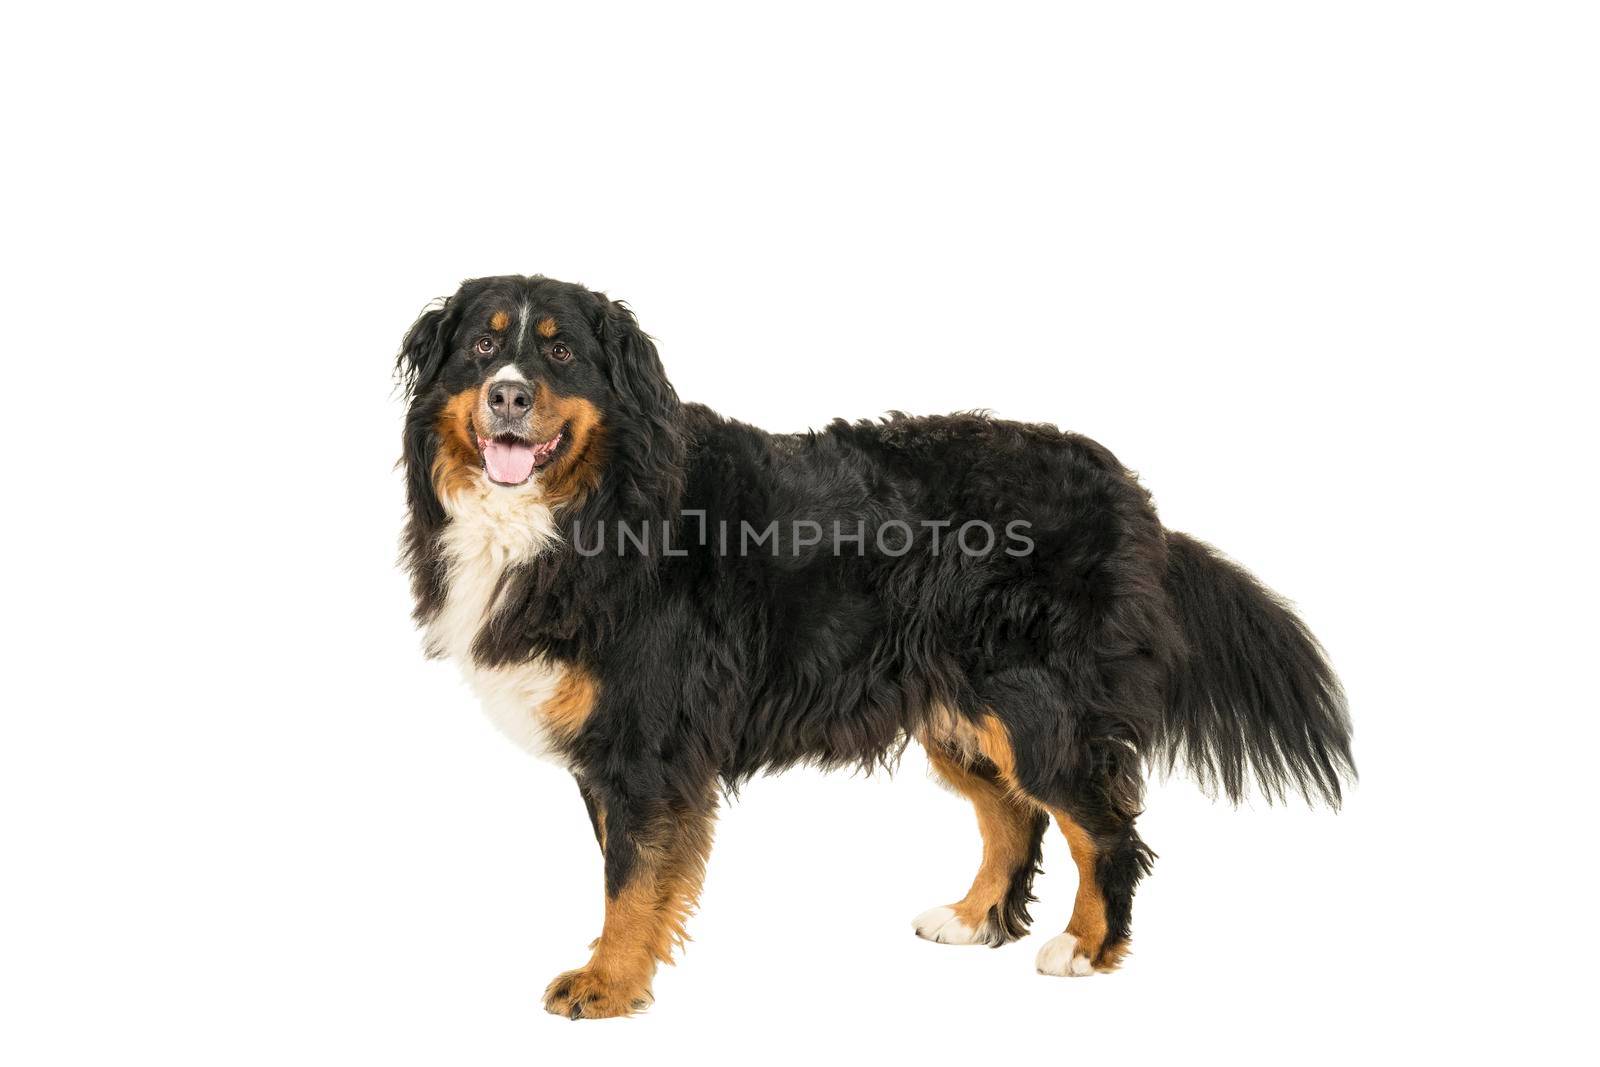 Berner Sennen Mountain dog standing looking up isolated on a white background by LeoniekvanderVliet